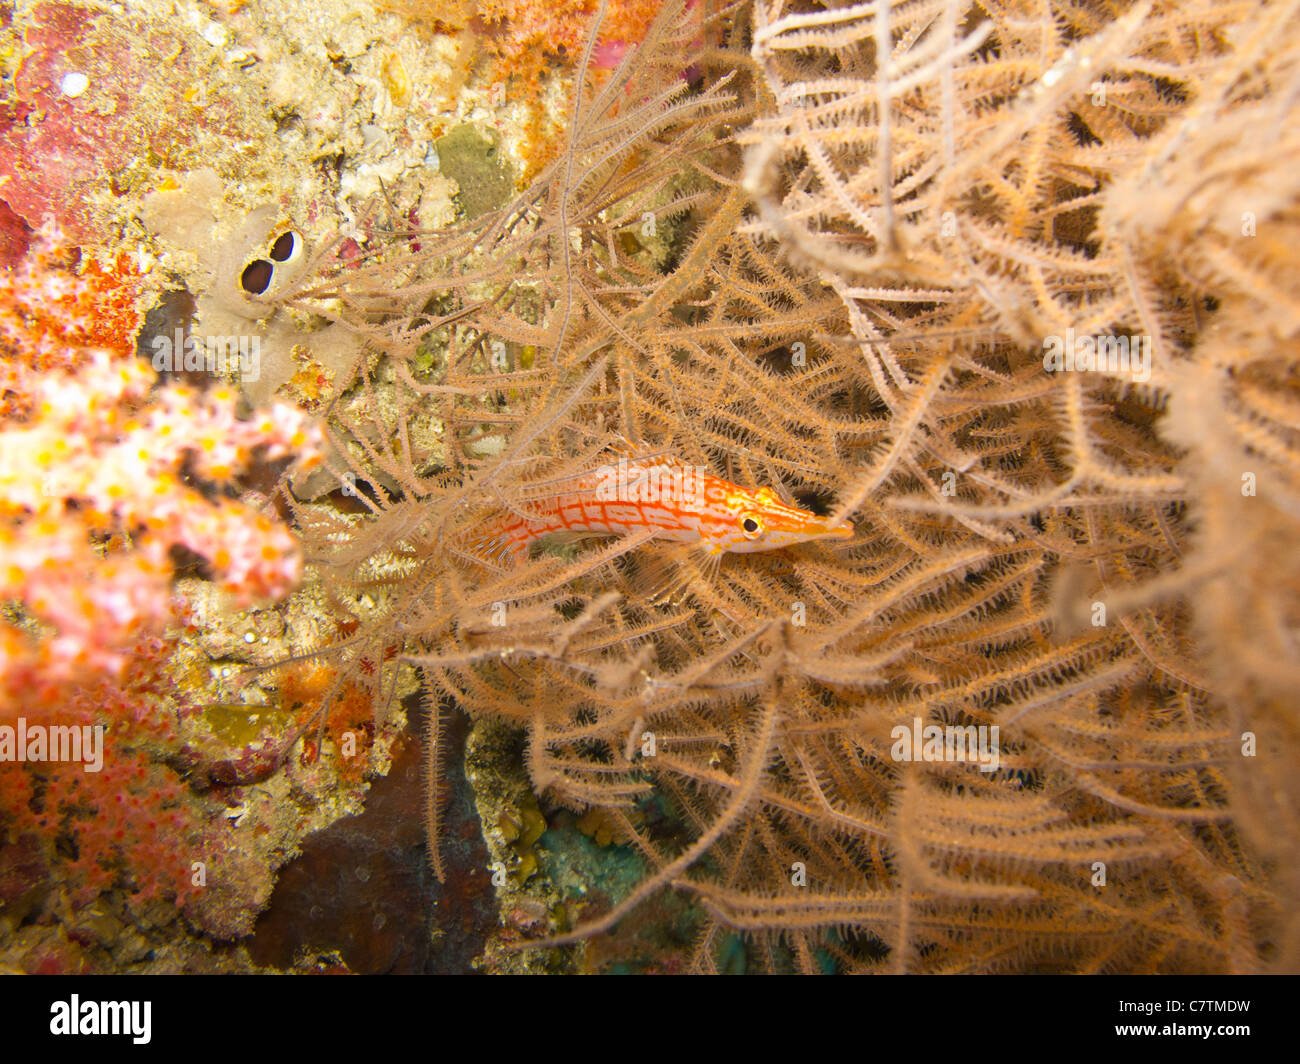 Longnose Hawkfish trying to hide itself among soft corals Stock Photo